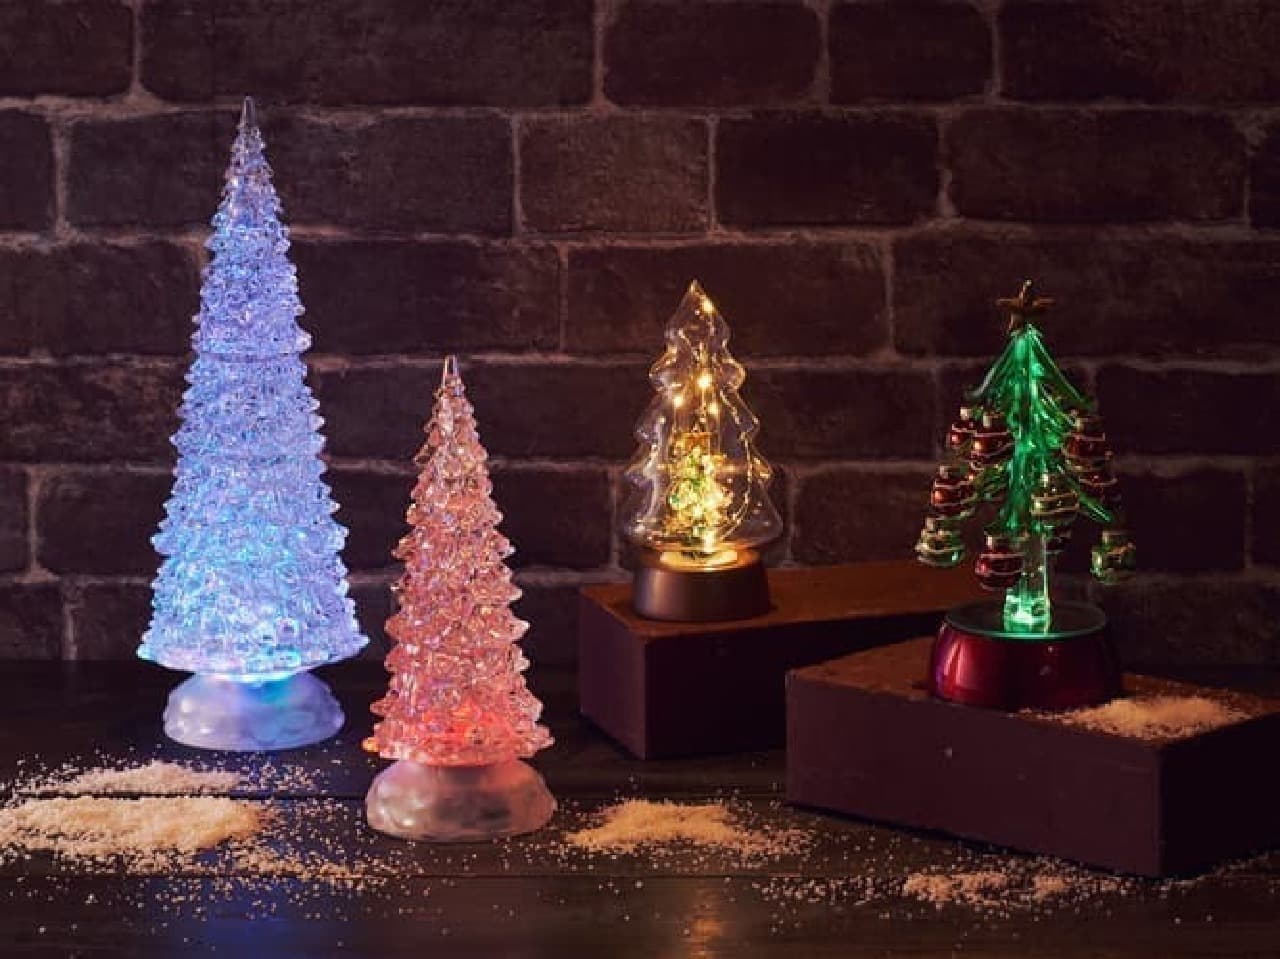 Christmas interior goods from AWESOME STORE